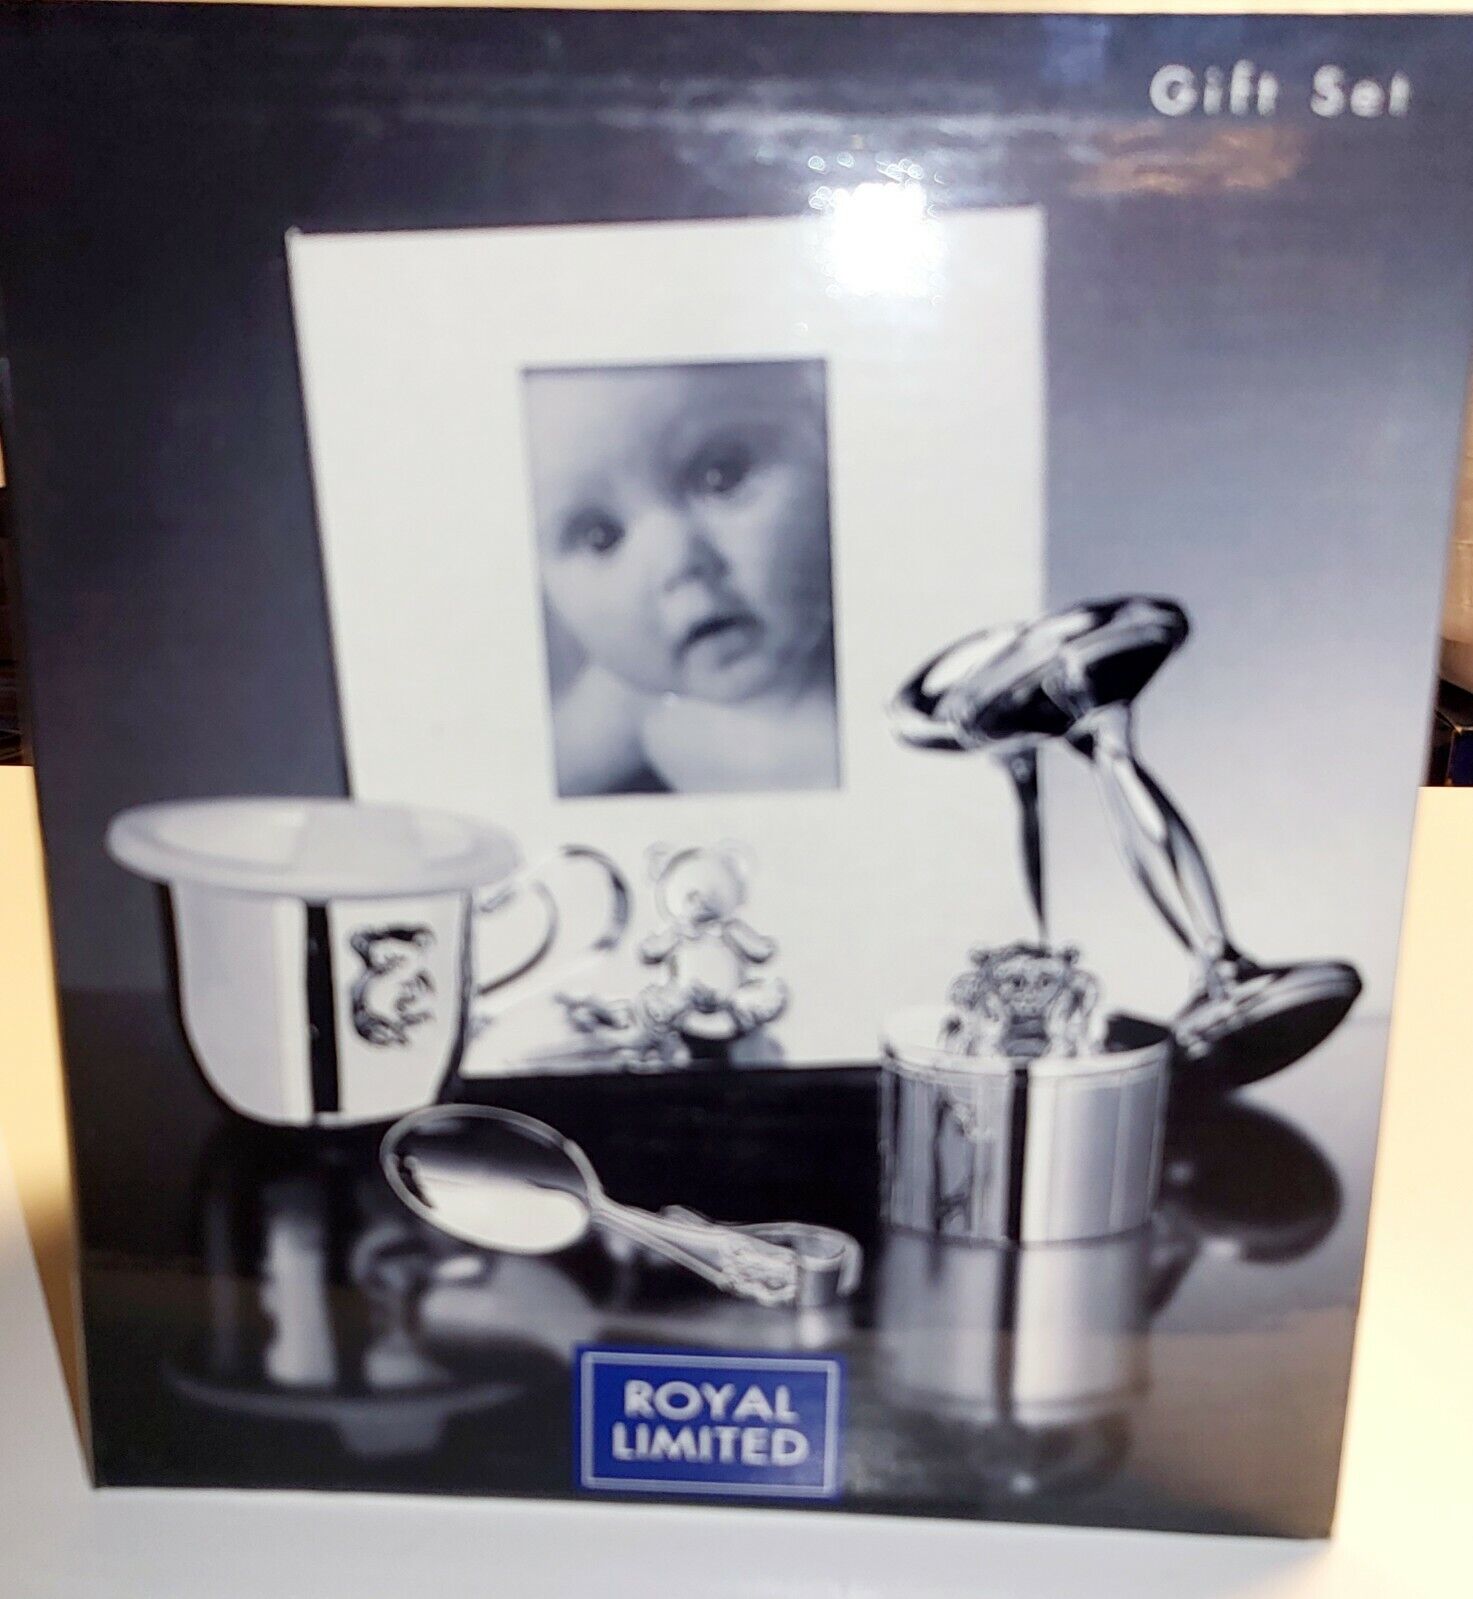 Royal Limited Silver Nursery Baby Gift DISPLAY Set,Rattle,Cup,Spoon,Box,Frame.